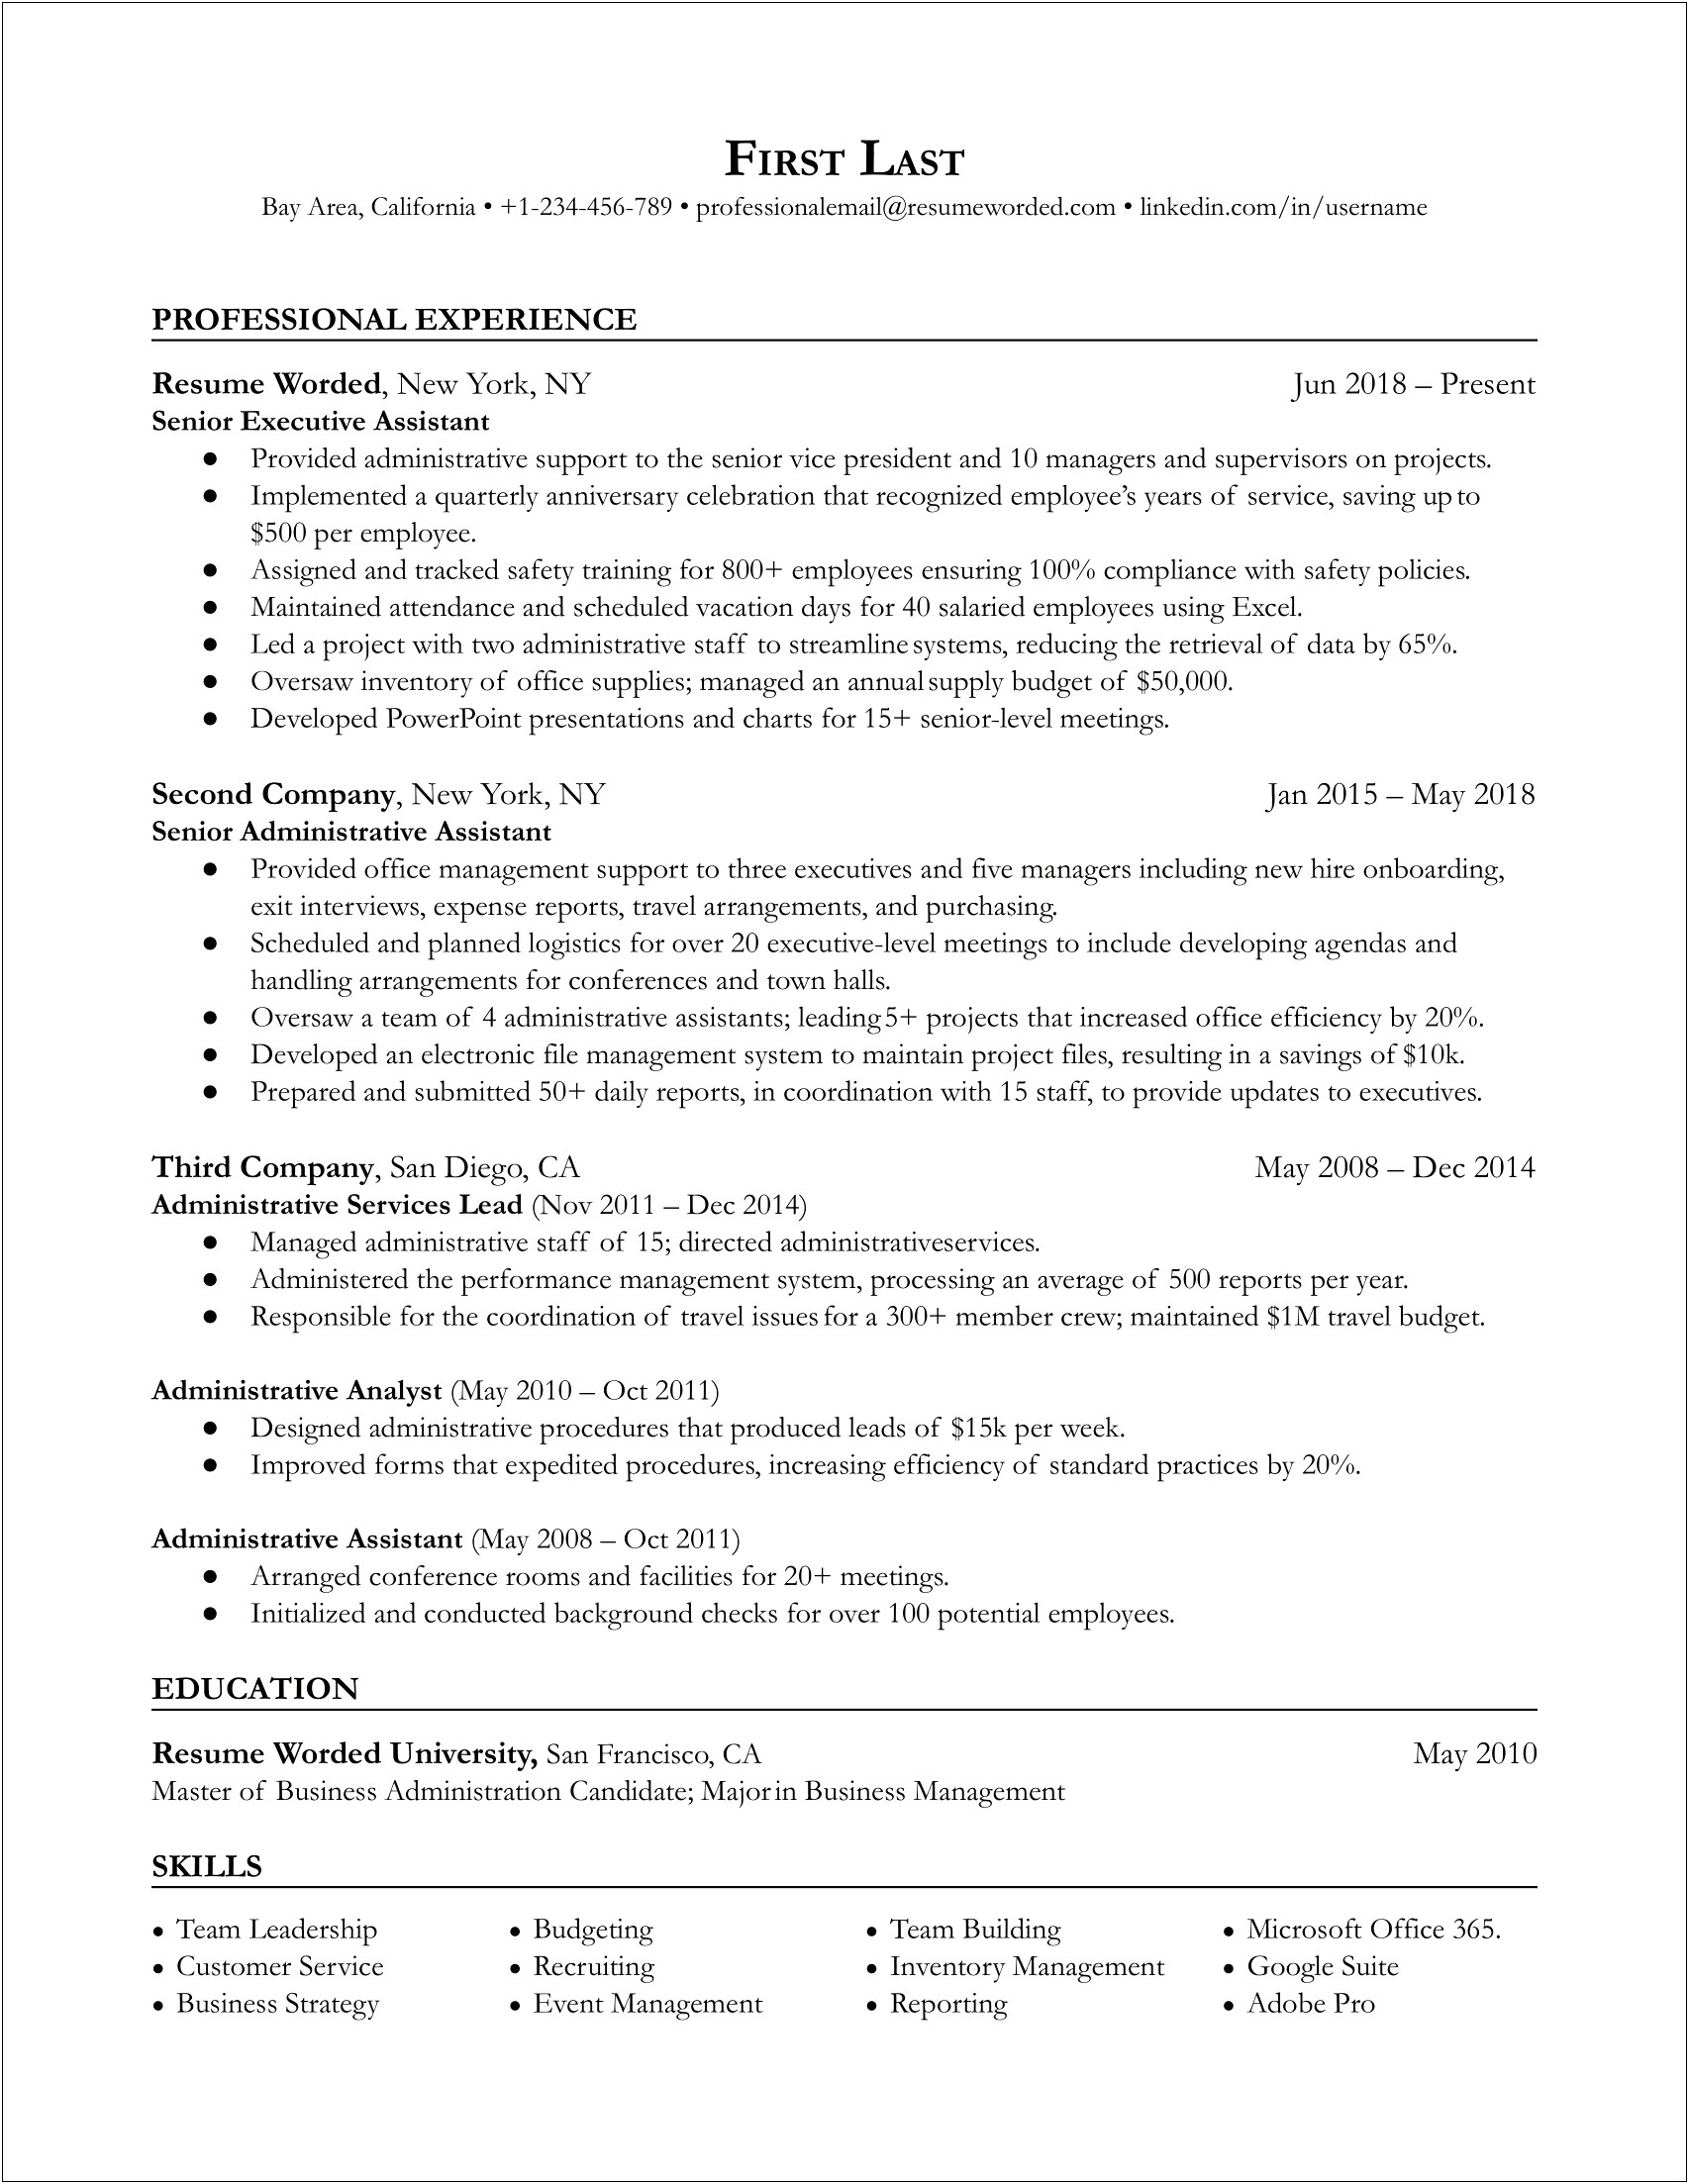 Resume Objective For A Personal Assistant